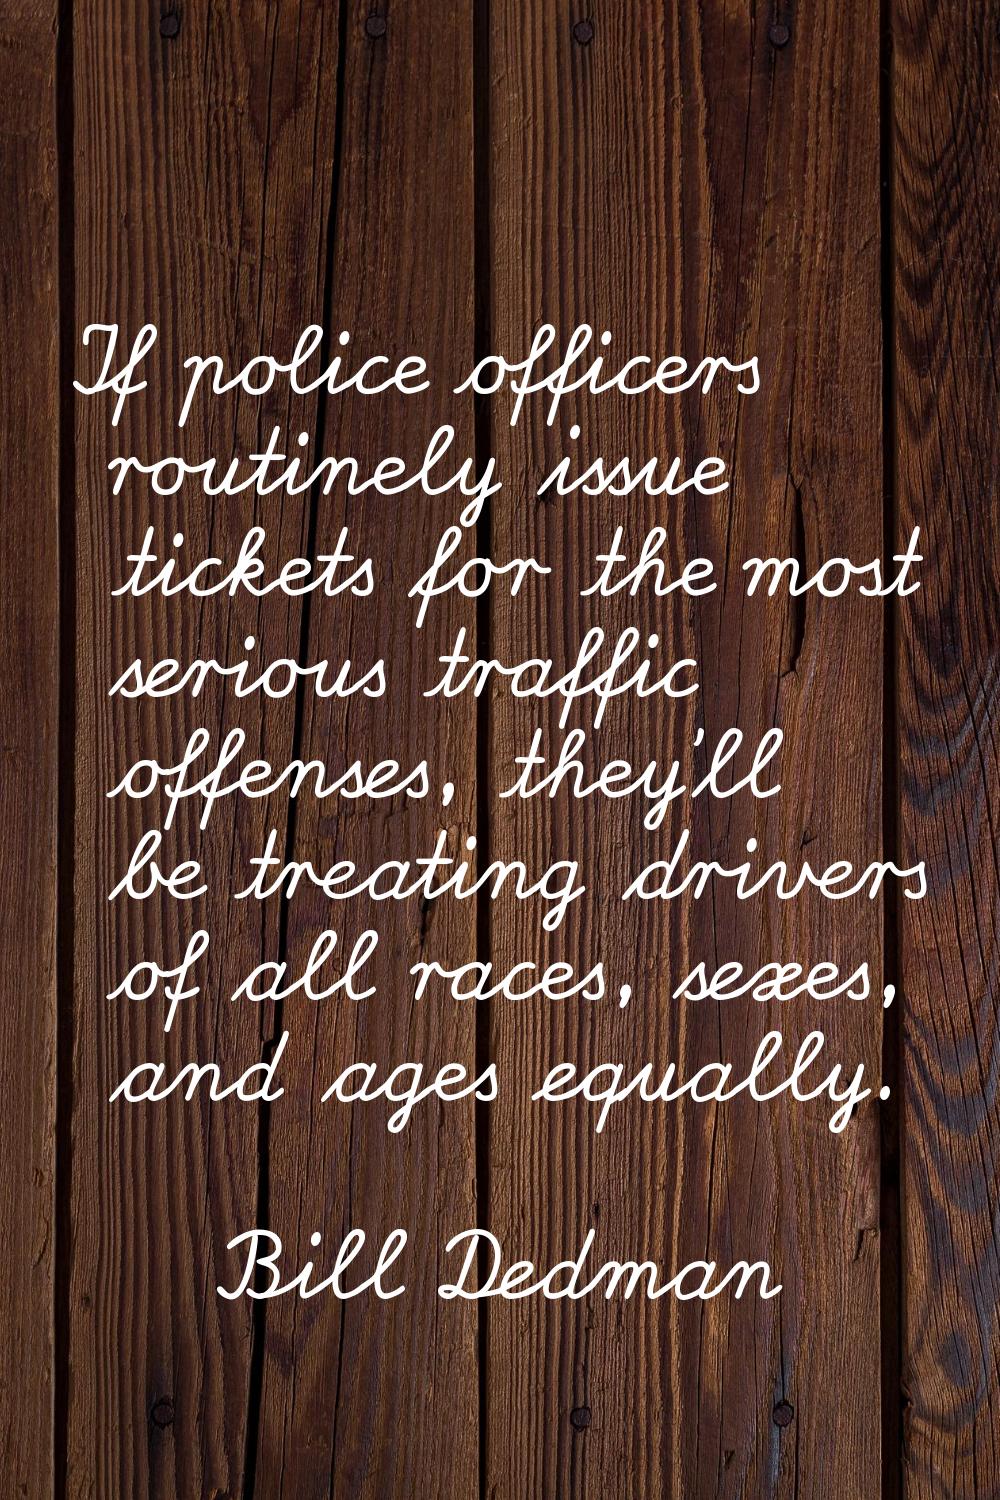 If police officers routinely issue tickets for the most serious traffic offenses, they'll be treati